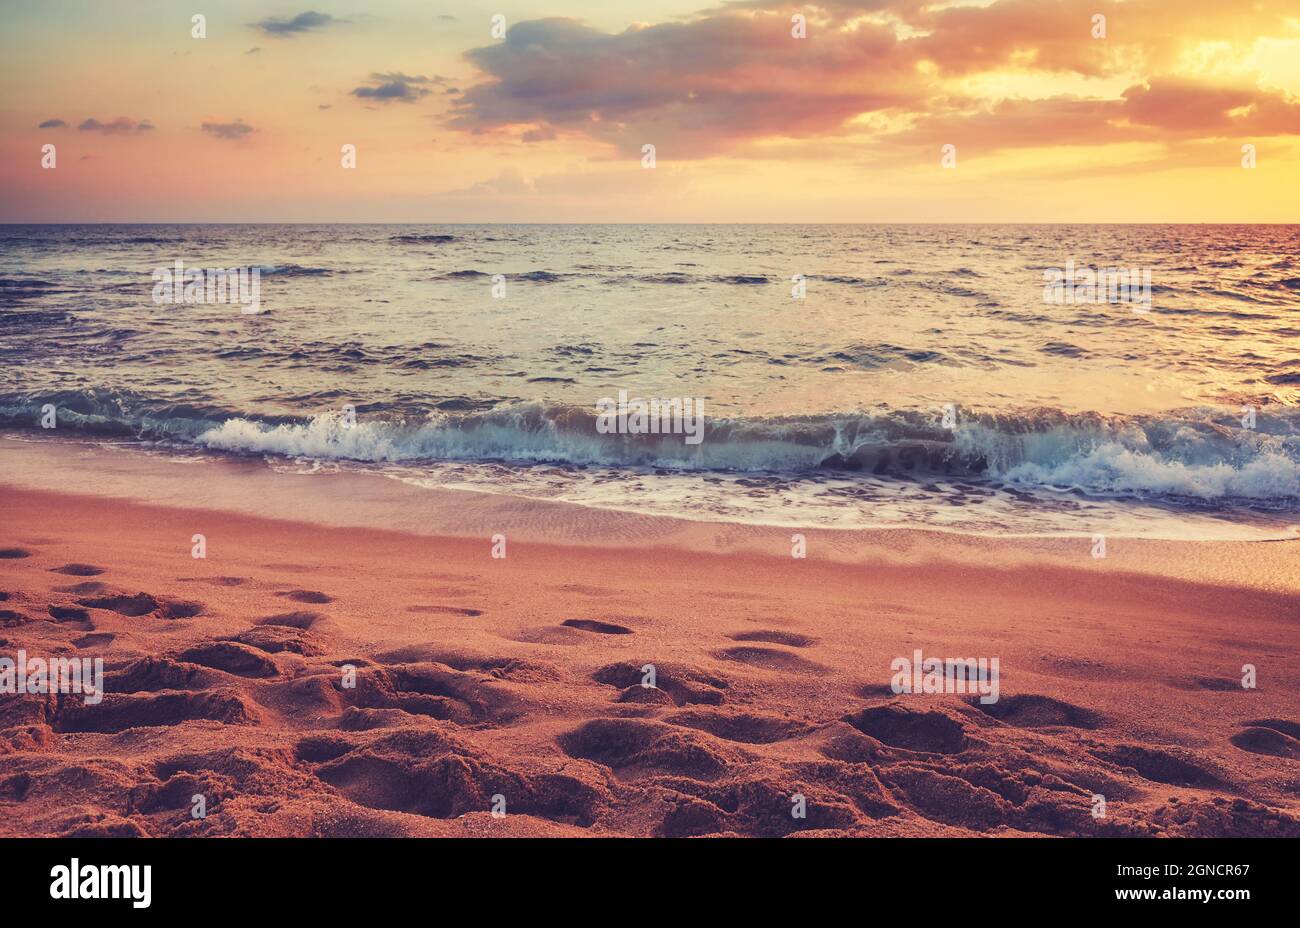 Tropical sandy beach with footprints in the sand at sunset, focus on the foreground, color toning applied. Stock Photo